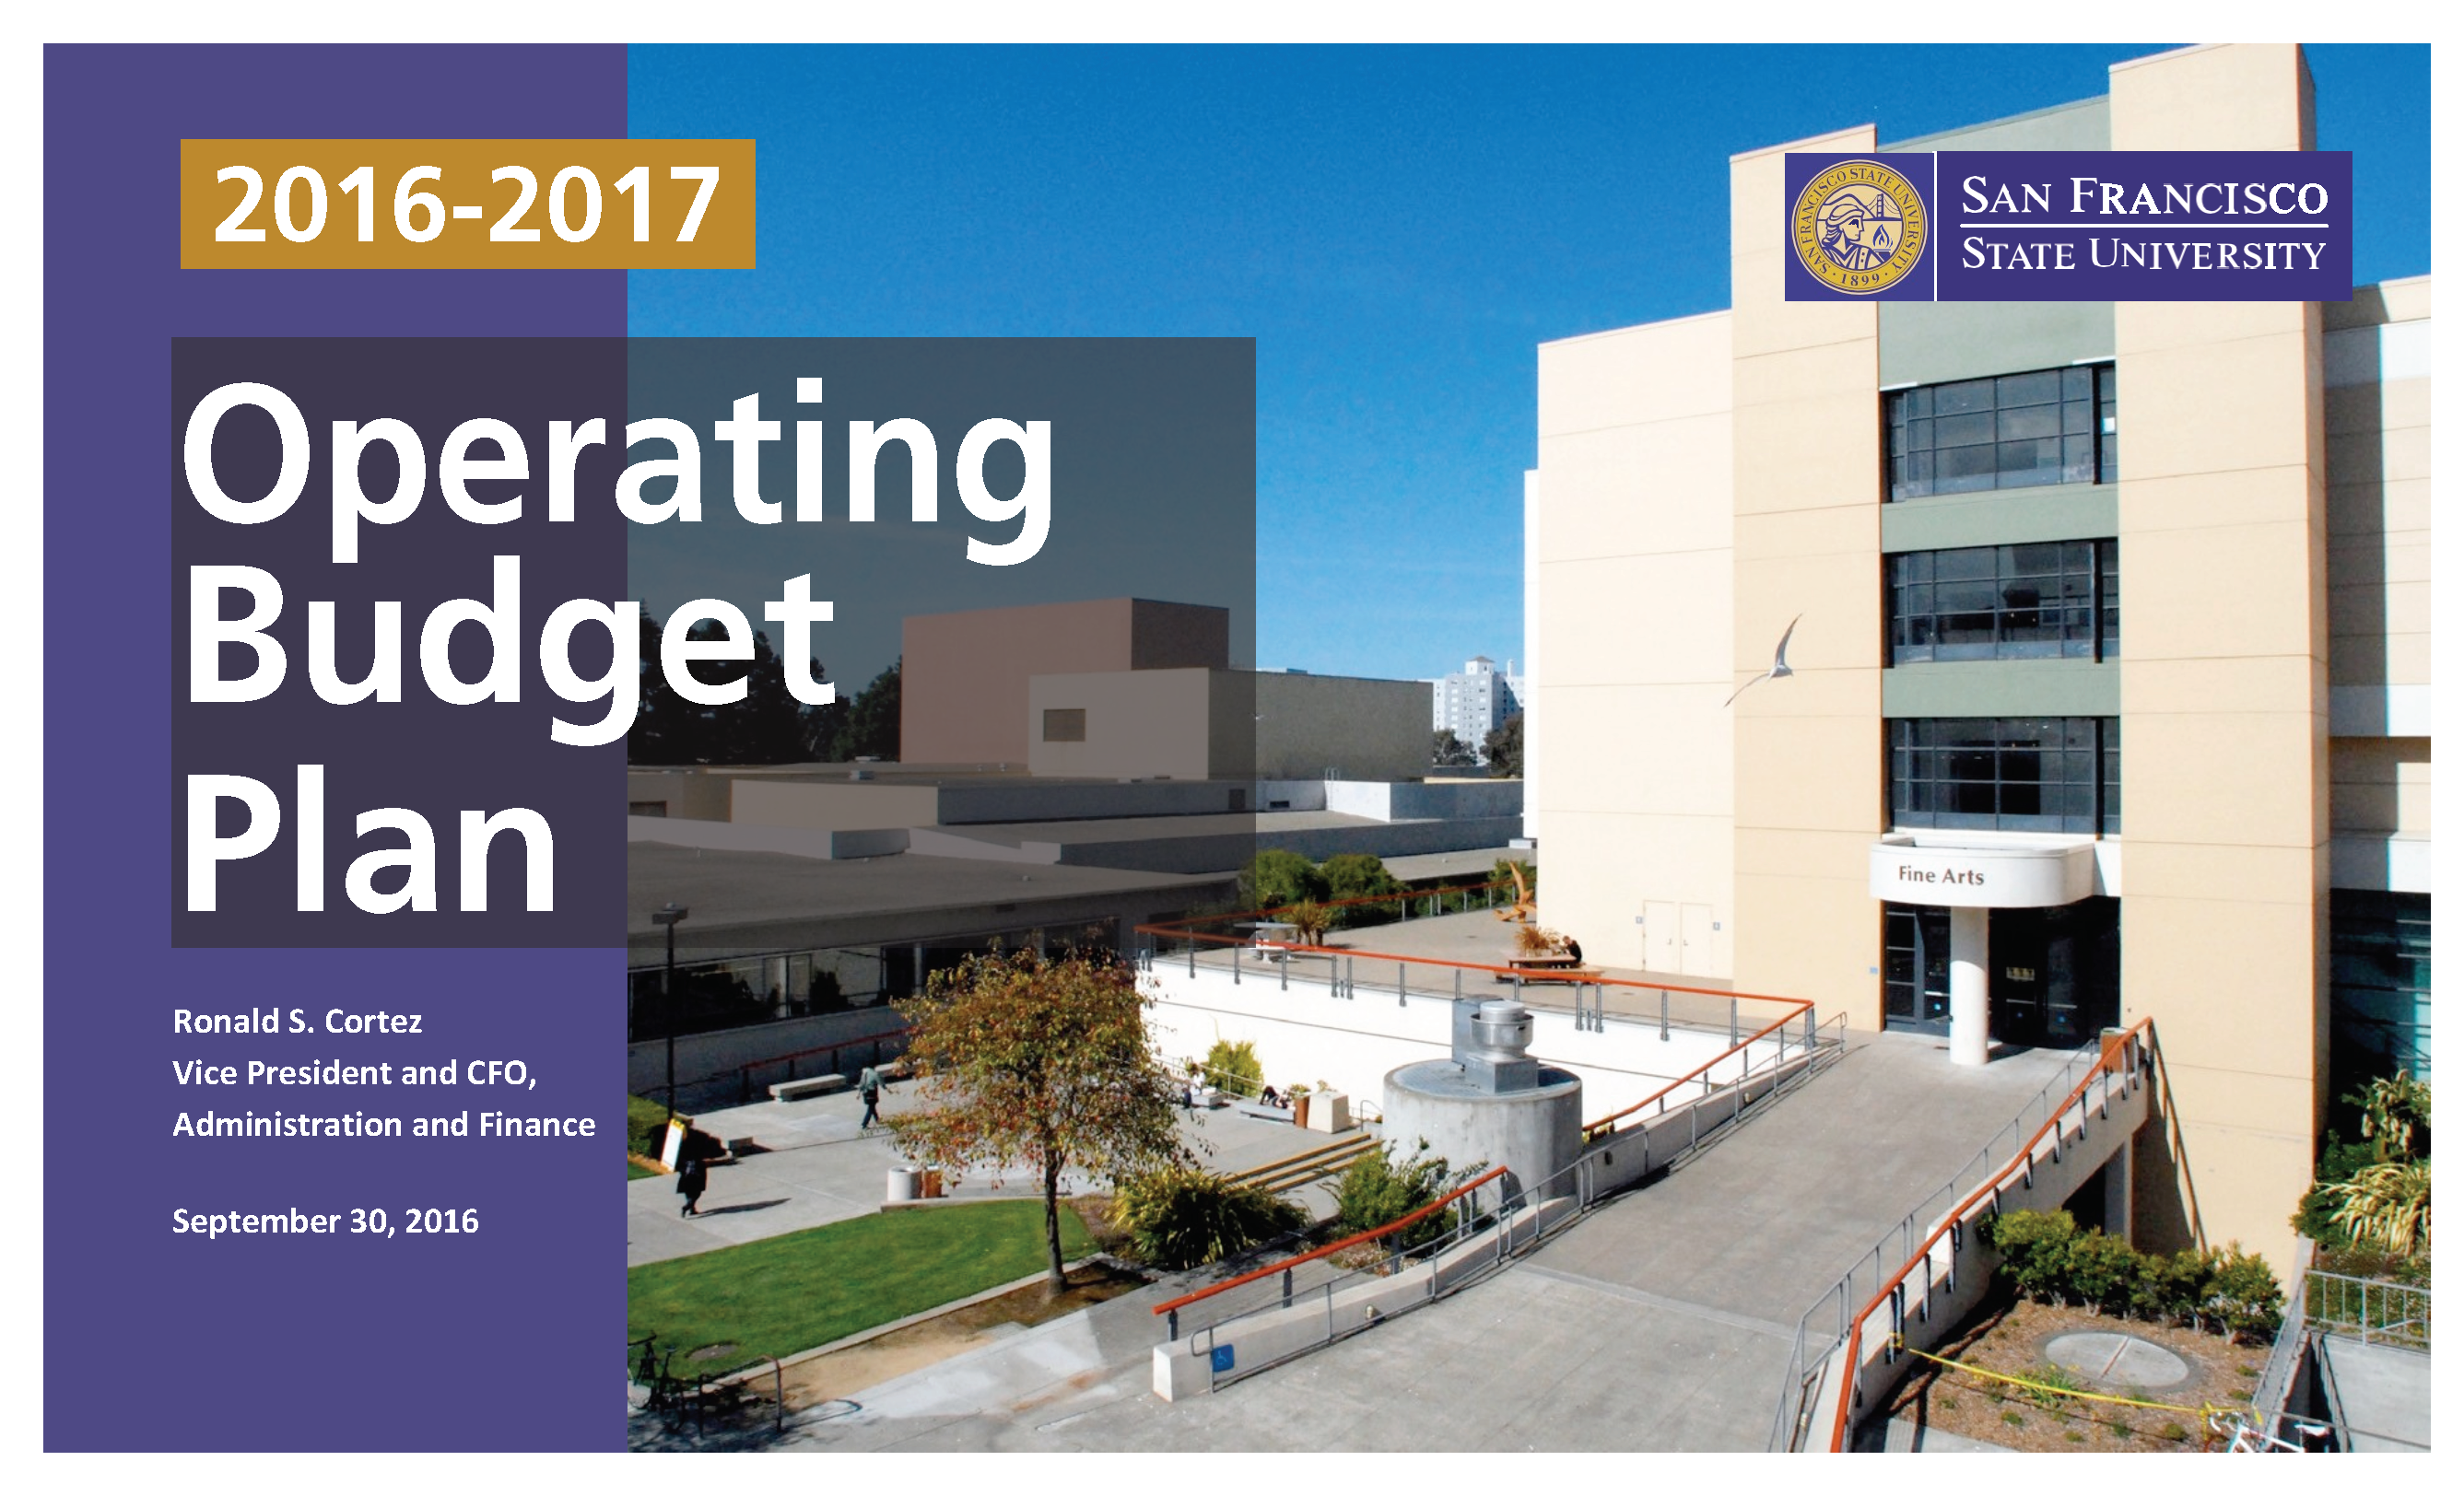 cover of SF State 2016-2017 Operating Budget Plan, published 9/30/2016